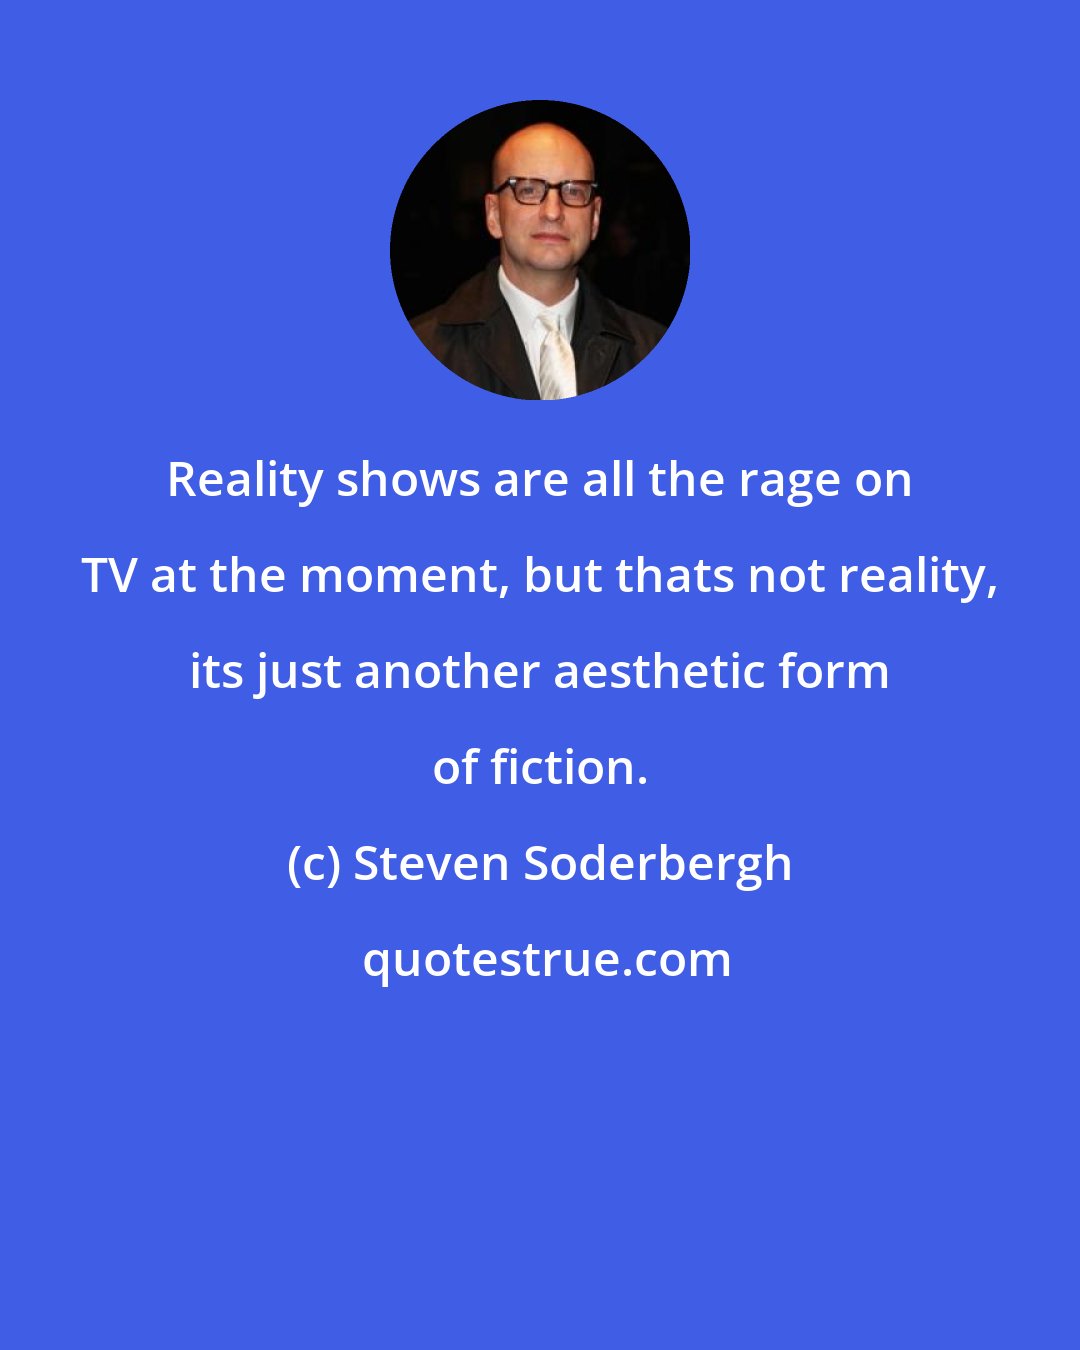 Steven Soderbergh: Reality shows are all the rage on TV at the moment, but thats not reality, its just another aesthetic form of fiction.